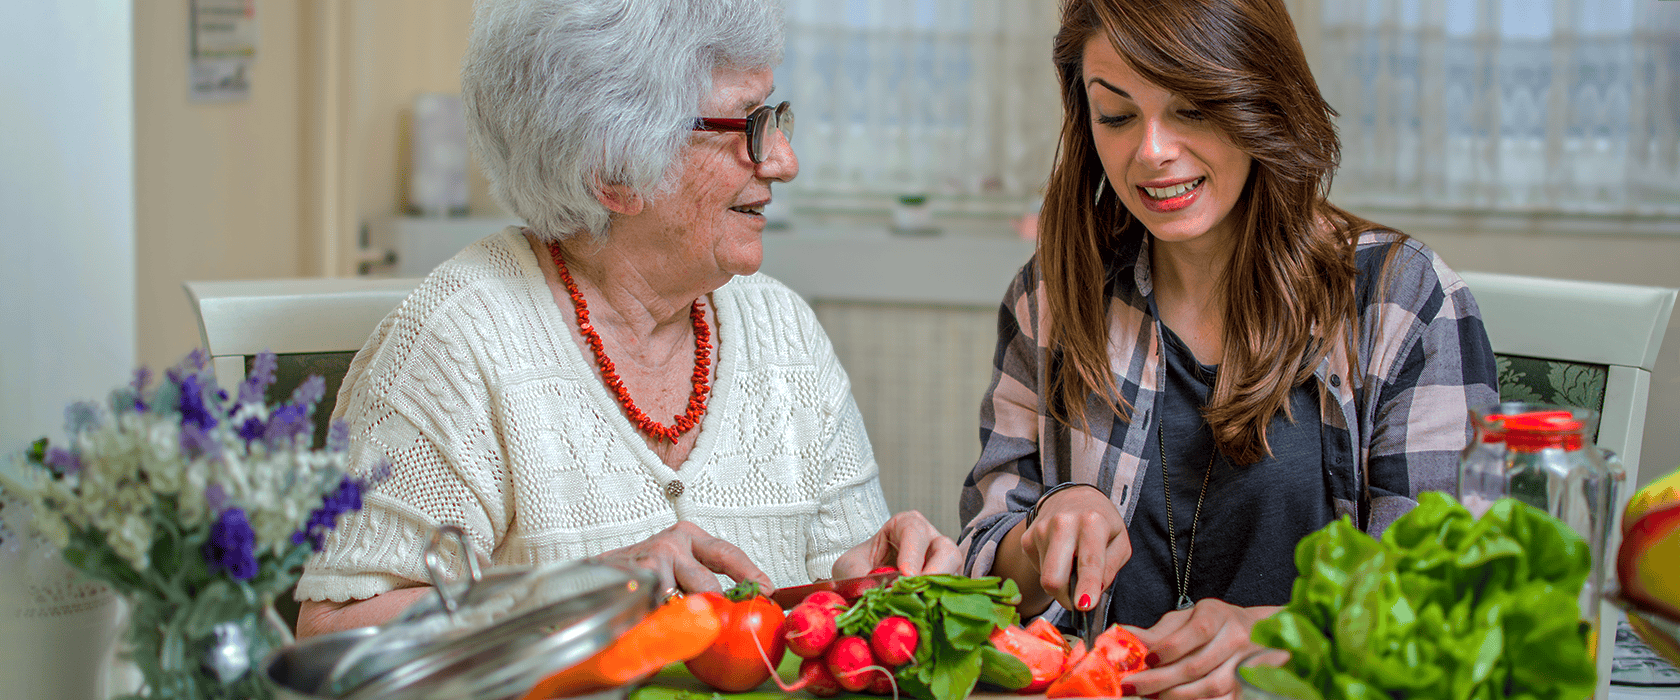 healthy spring recipes for seniors - chopping vegetables 